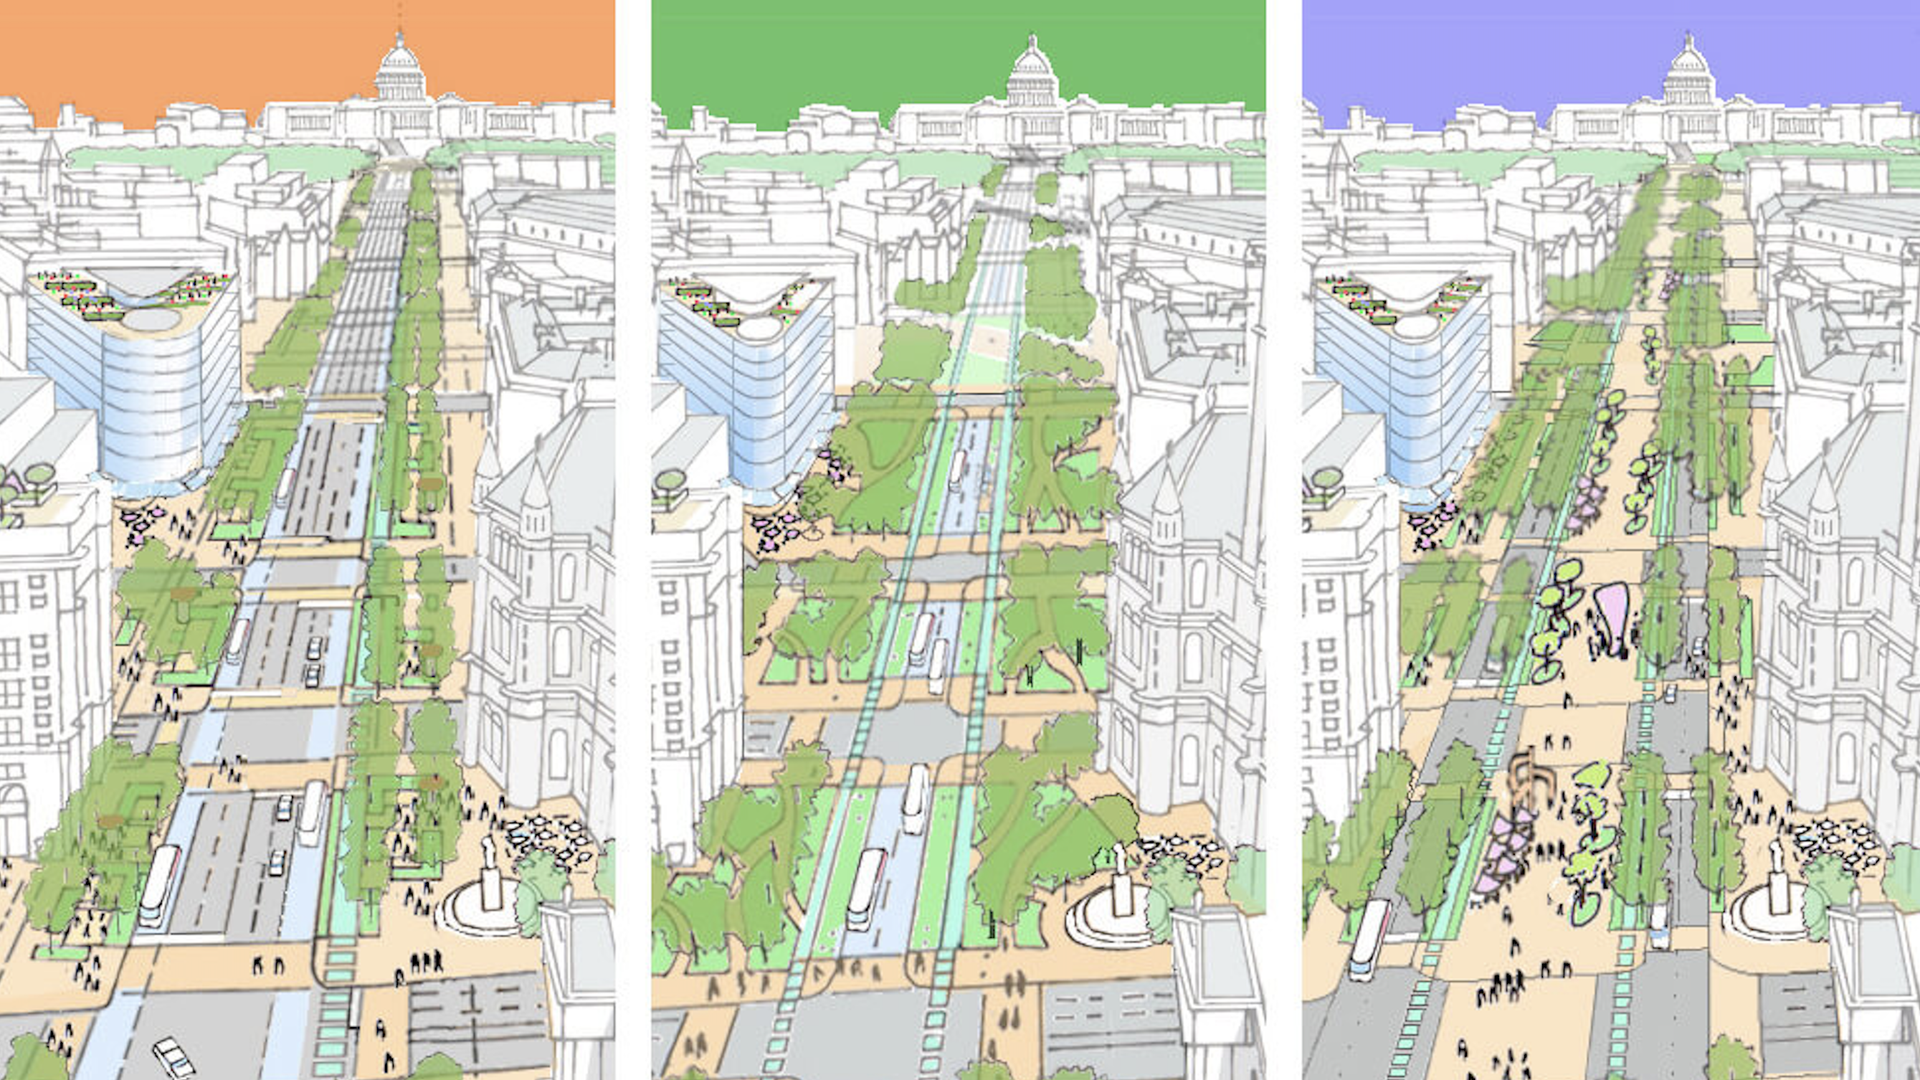 Renderings of a concept remake of Pennsylvania Avenue, showing more zones for parks, pedestrians and transit